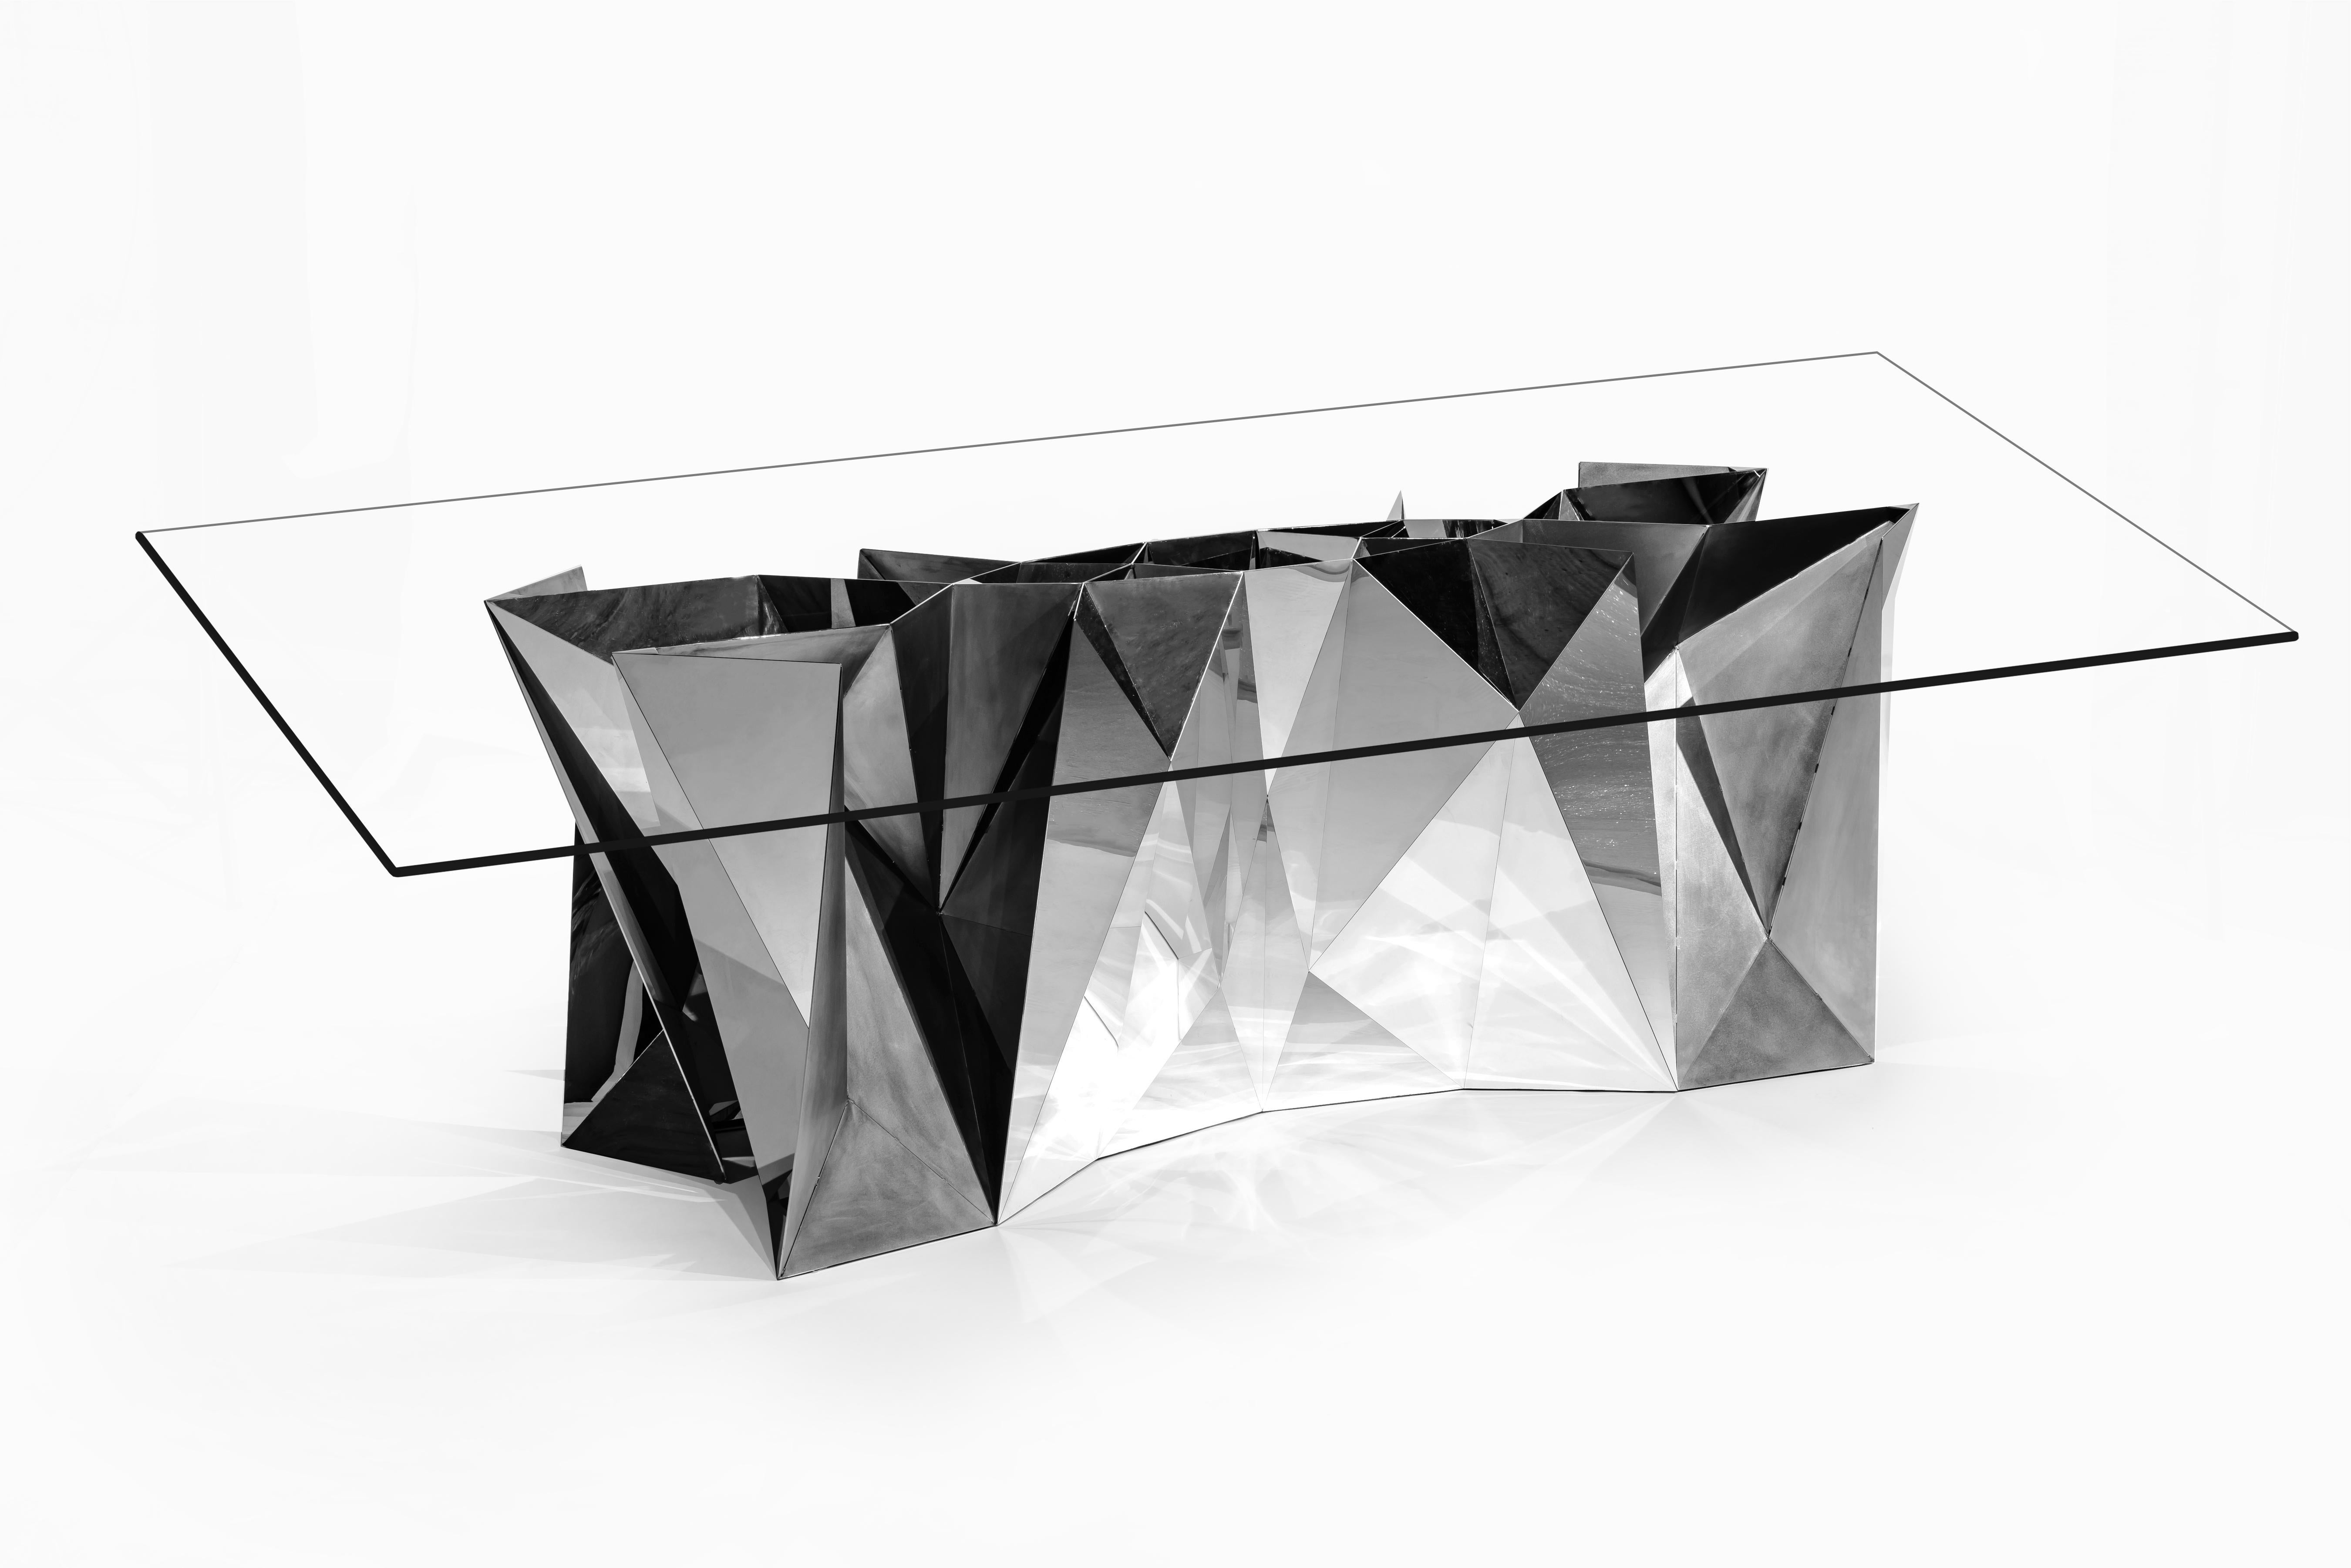 This elegantly designed table was created with handmade digital crafts, the same fabrication techniques devised in Zhoujie’s digital laboratory. The work's digital roots lend an architectural and minimal aesthetic not commonly found at this